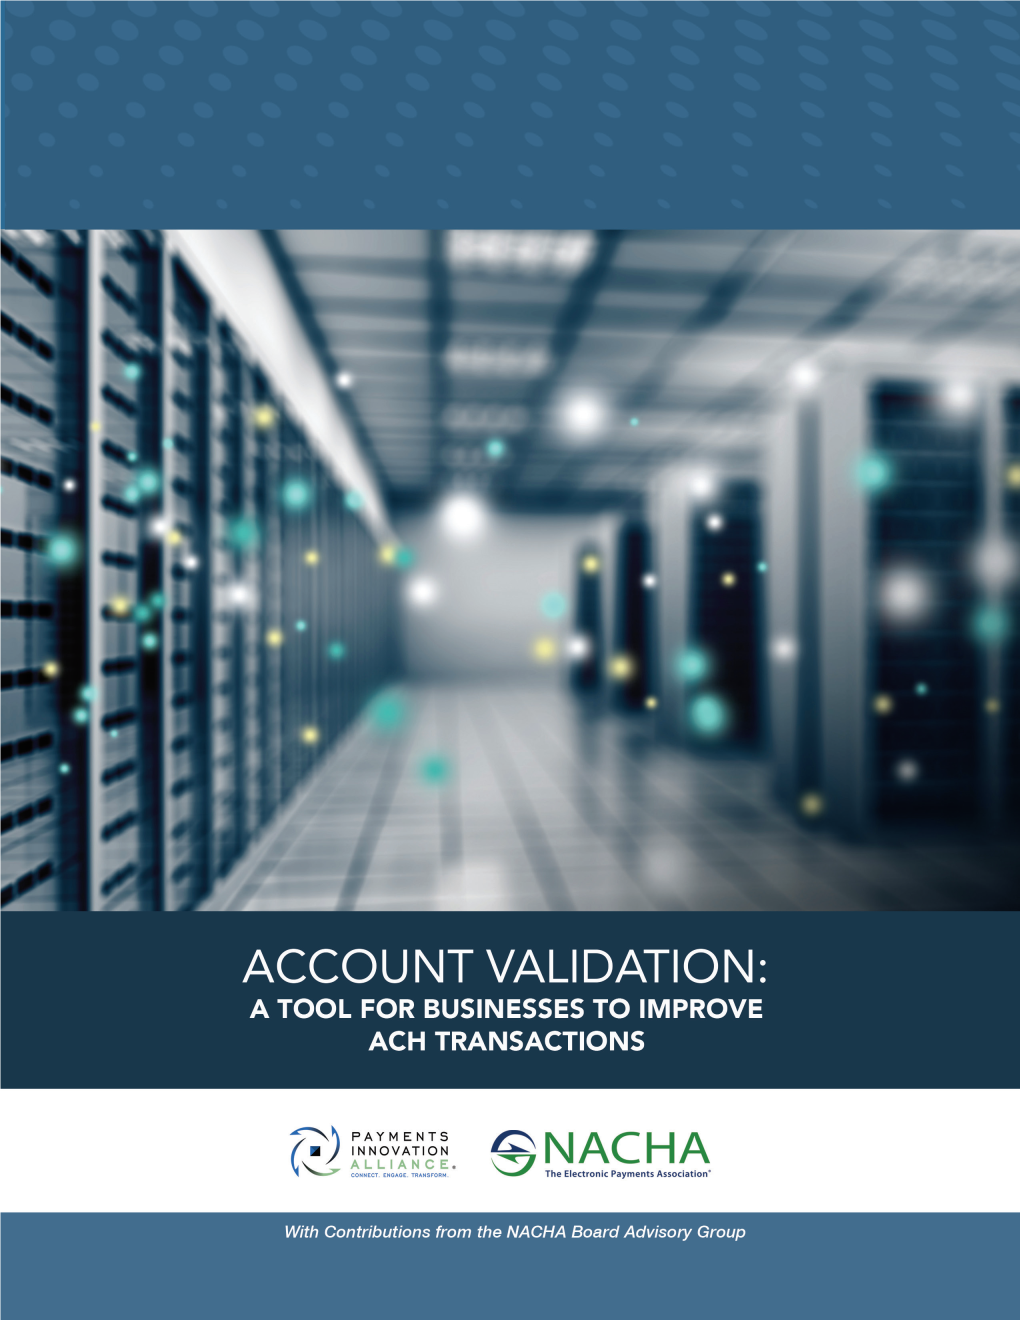 About “Account Validation: a Tool for Businesses to Improve Ach Transactions”